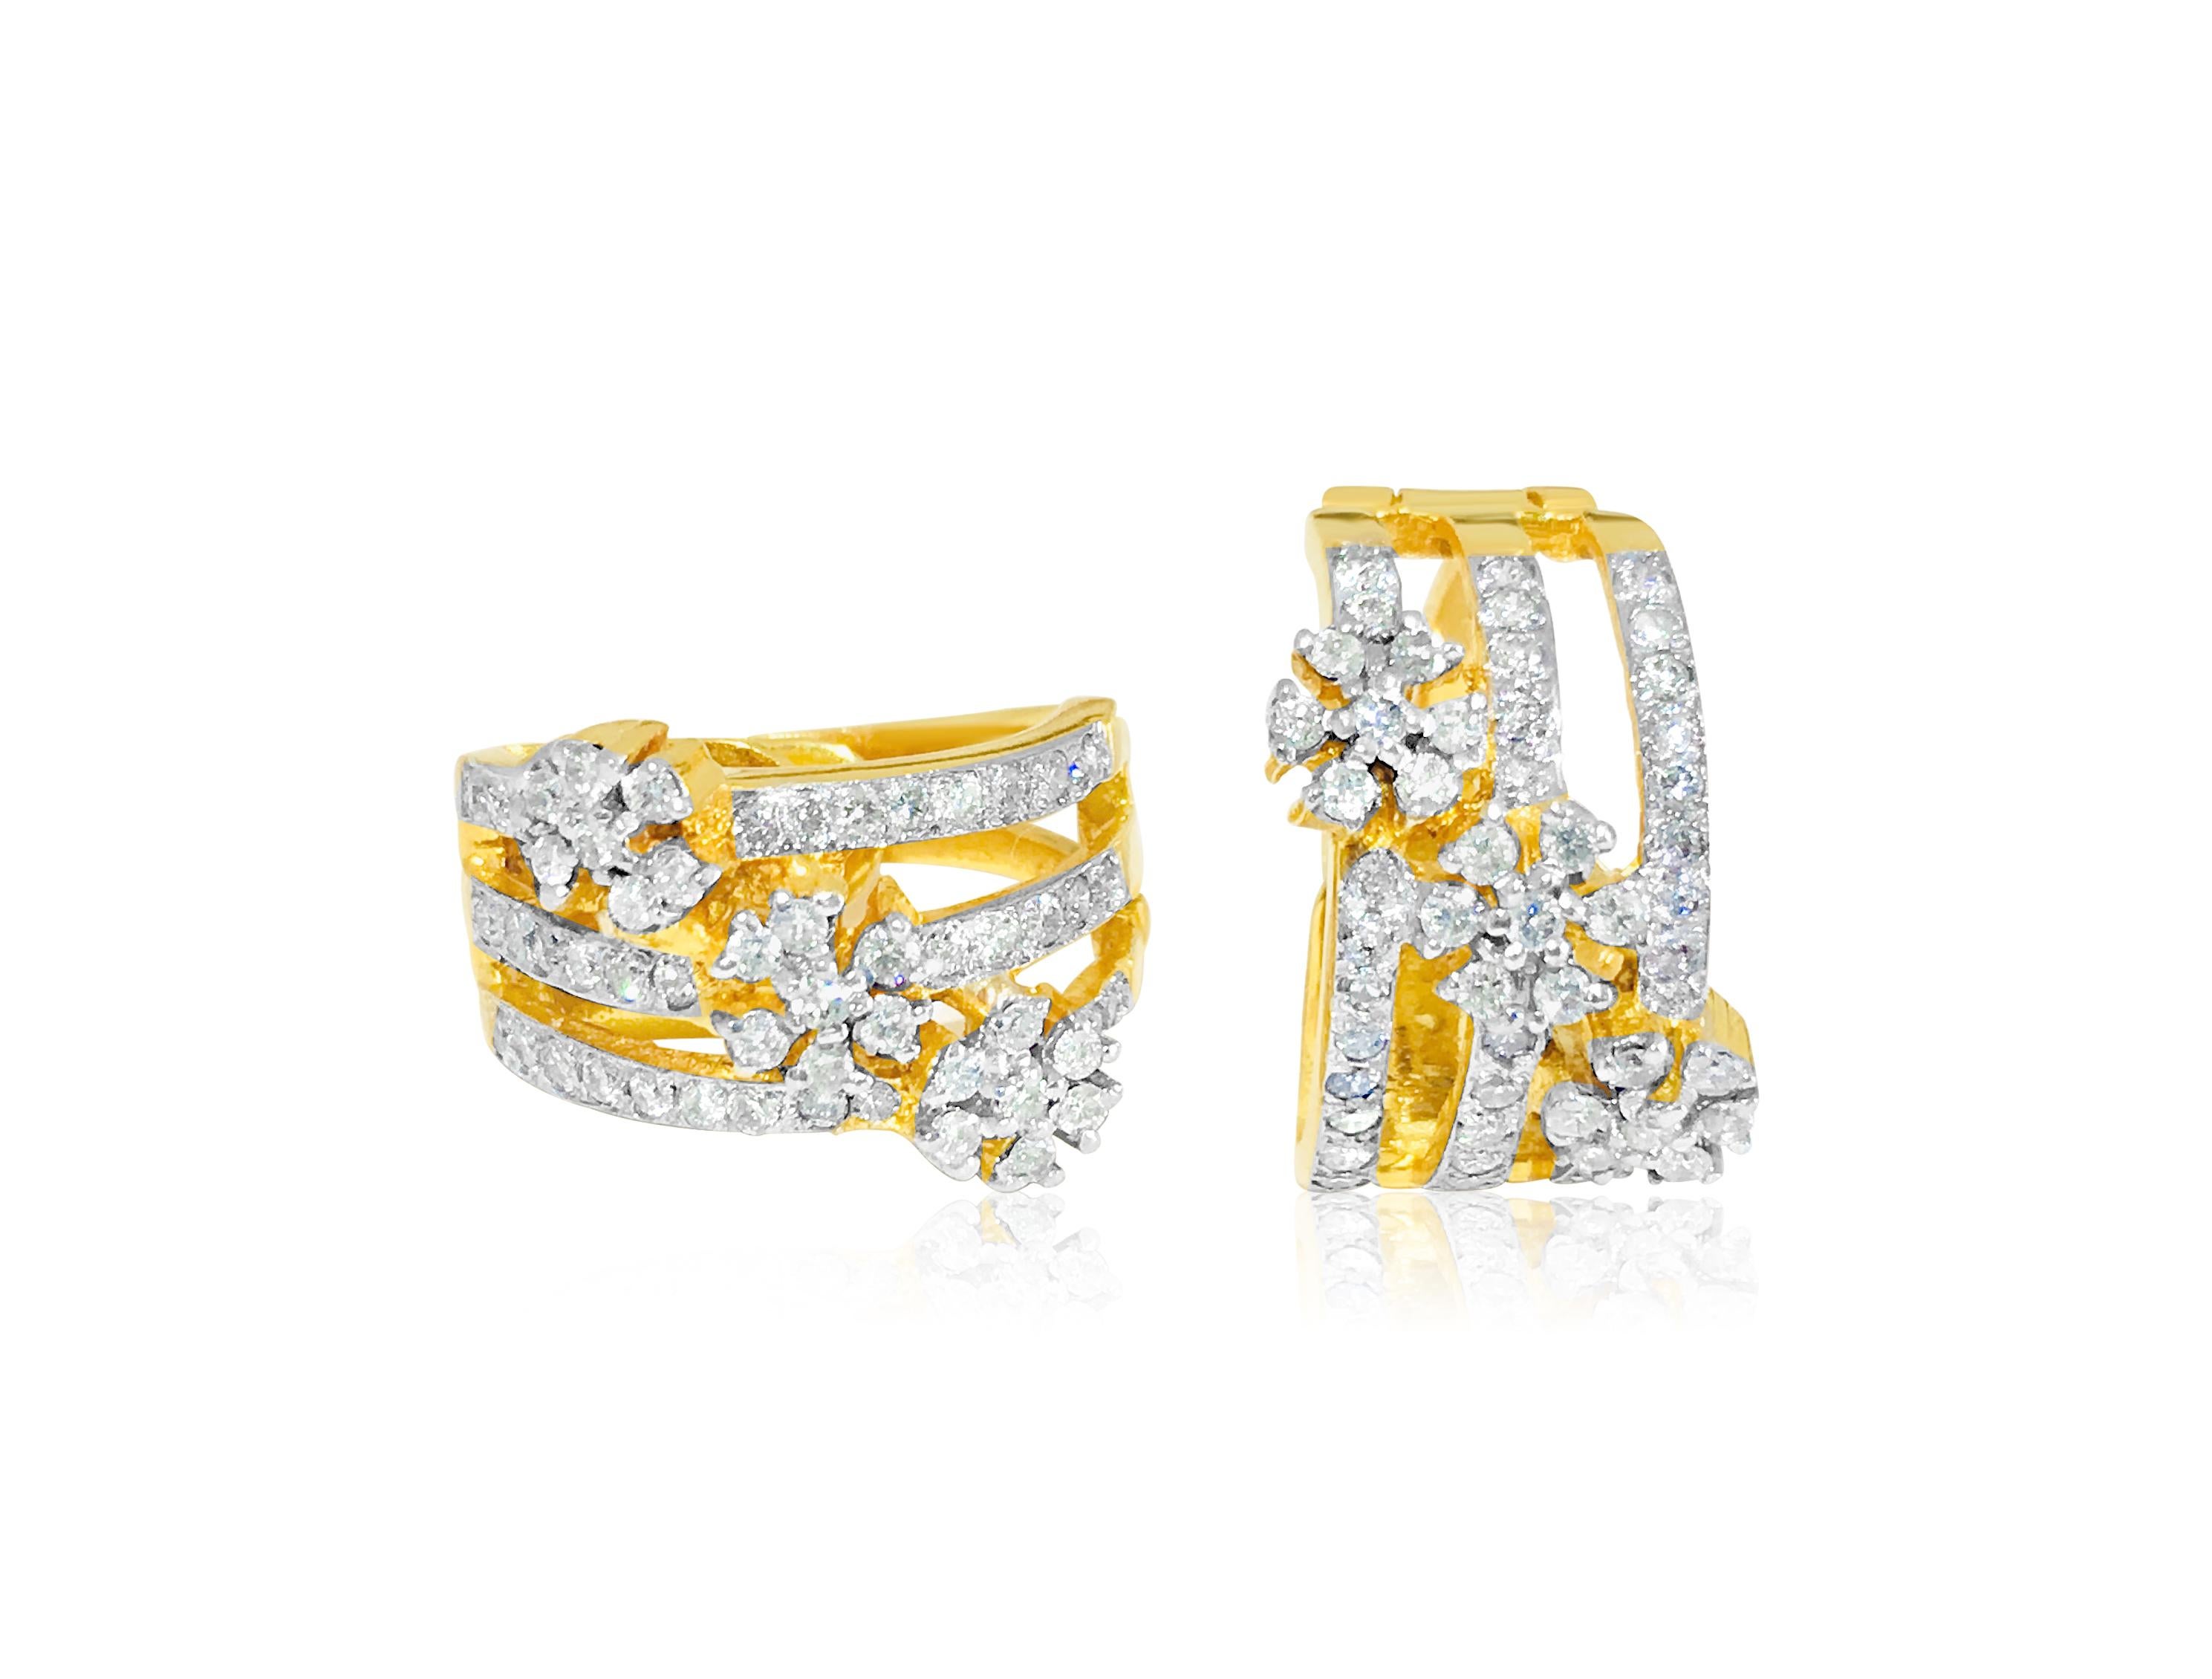 Contemporary 1.35 Carat Diamonds in 14k Yellow Gold Earrings. For Sale